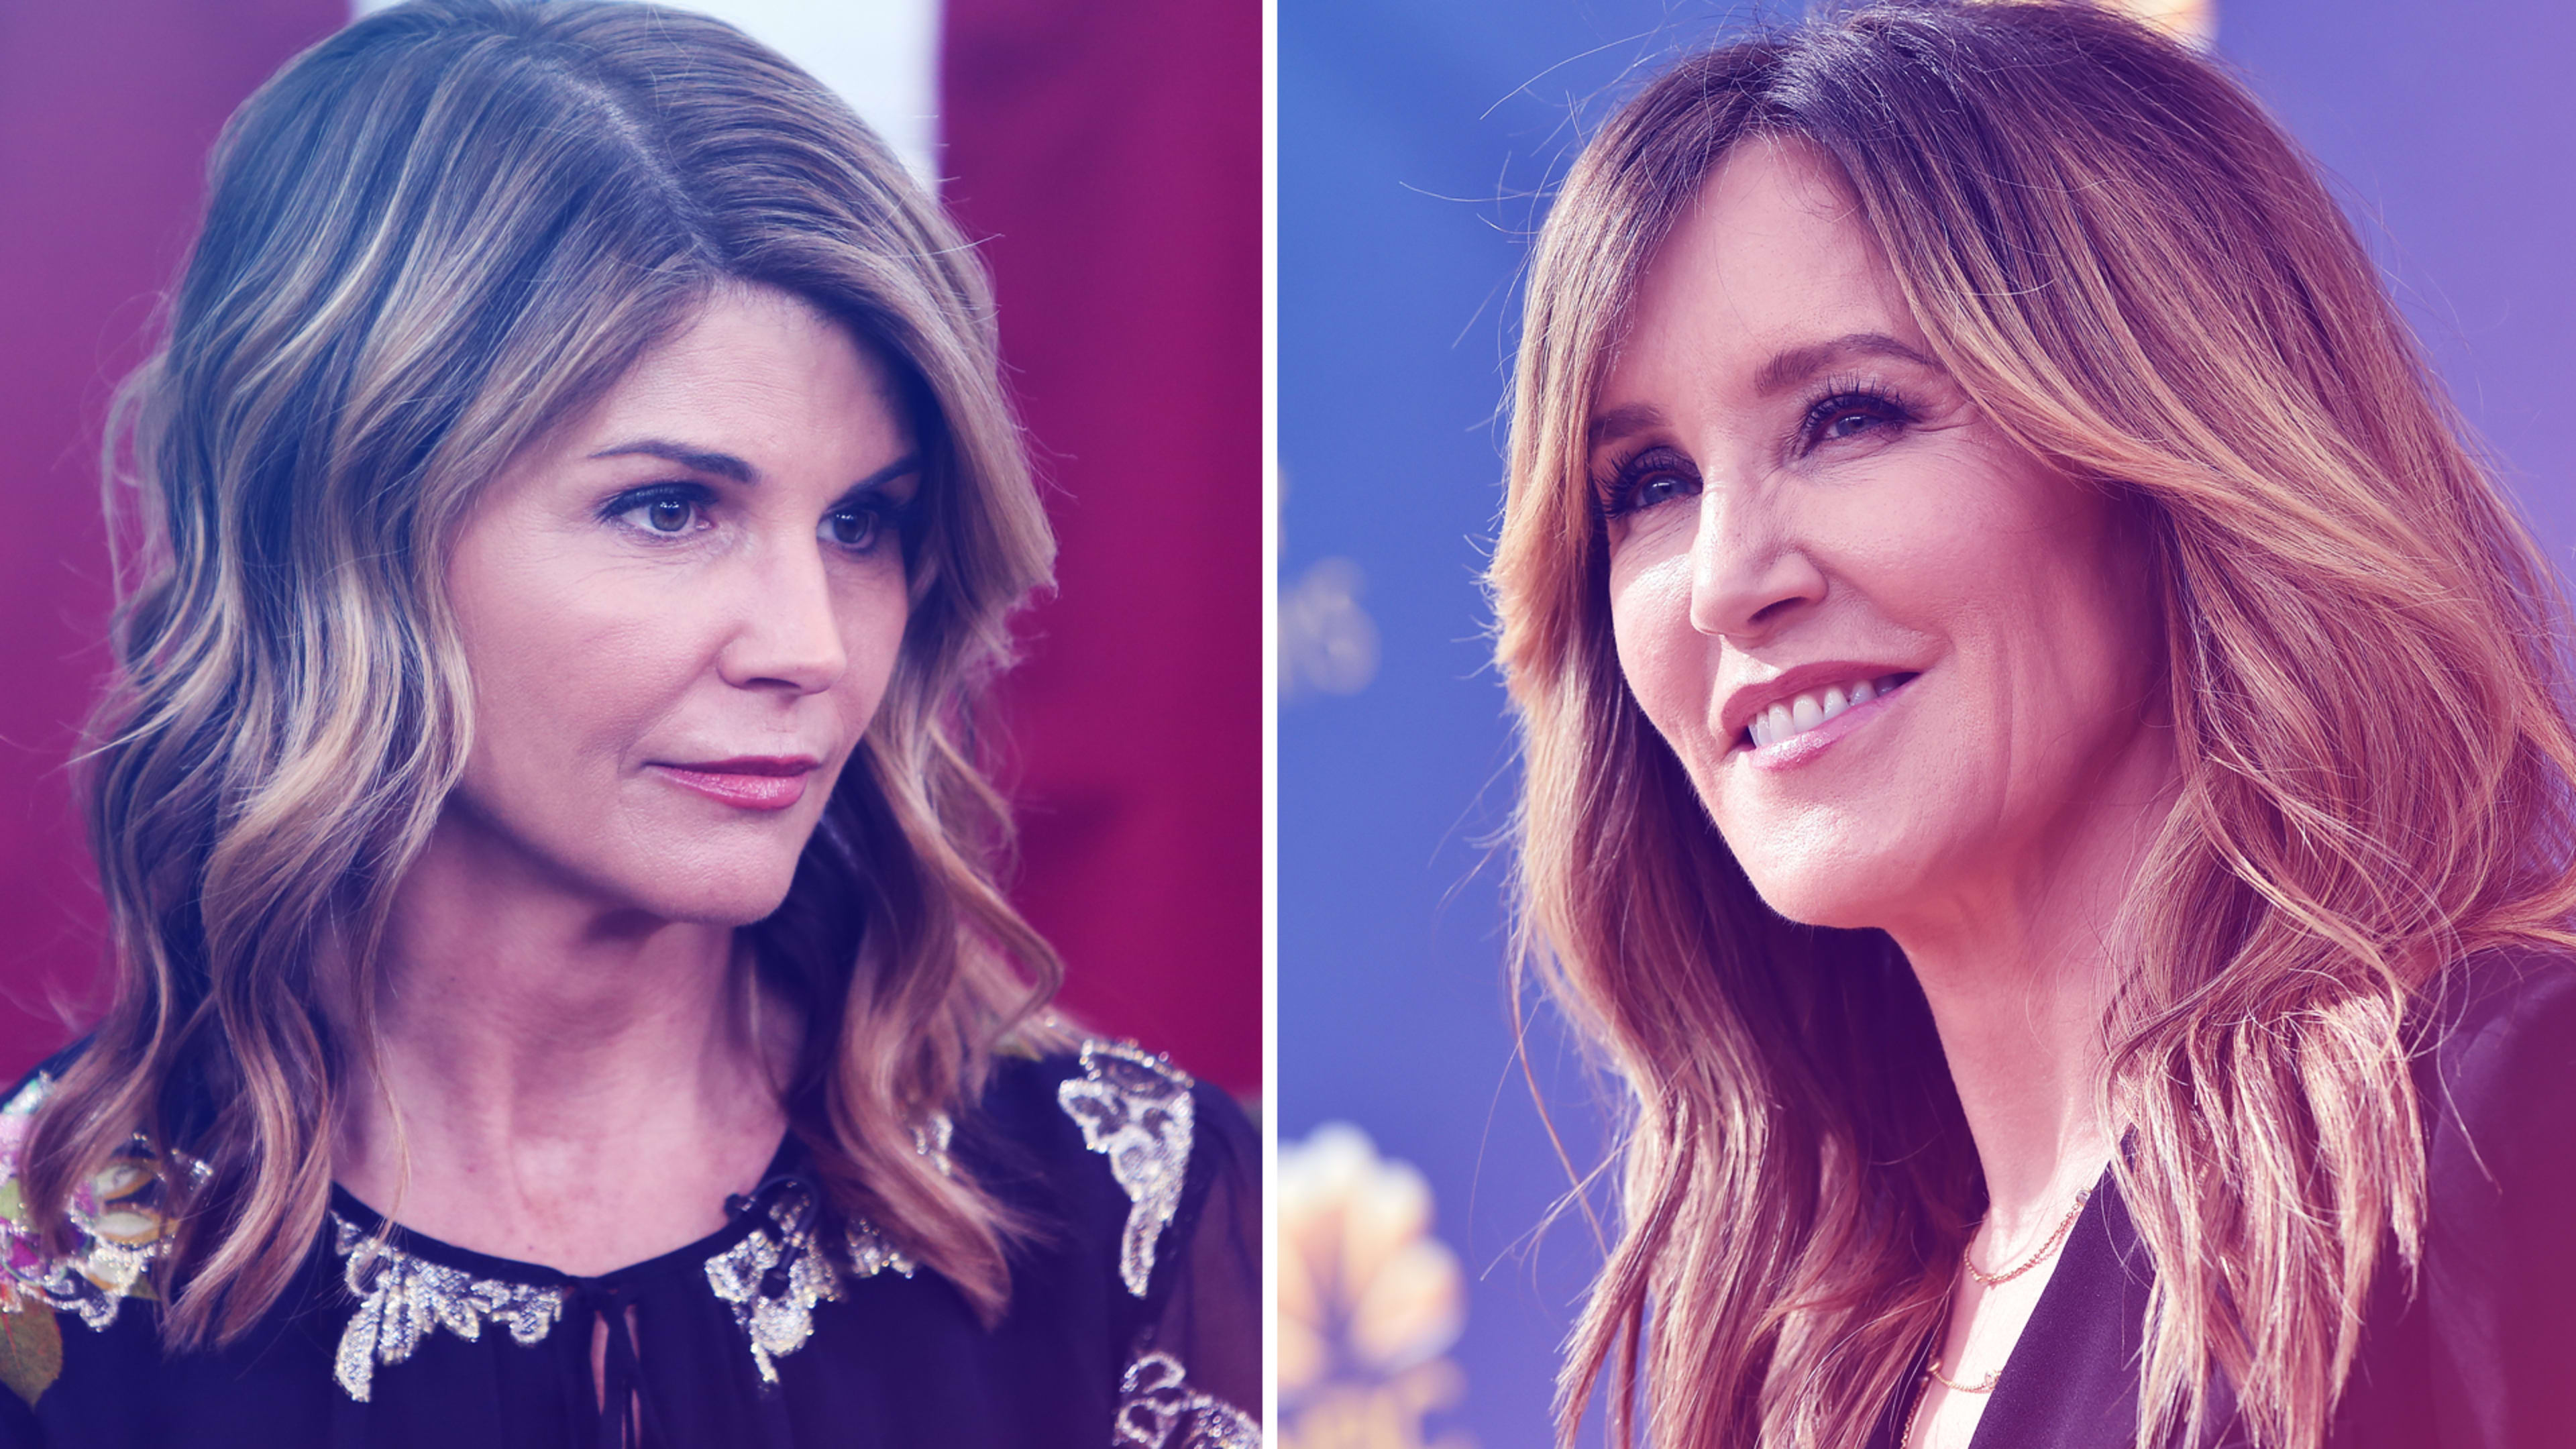 Felicity Huffman, Lori Loughlin charged in college bribery scam